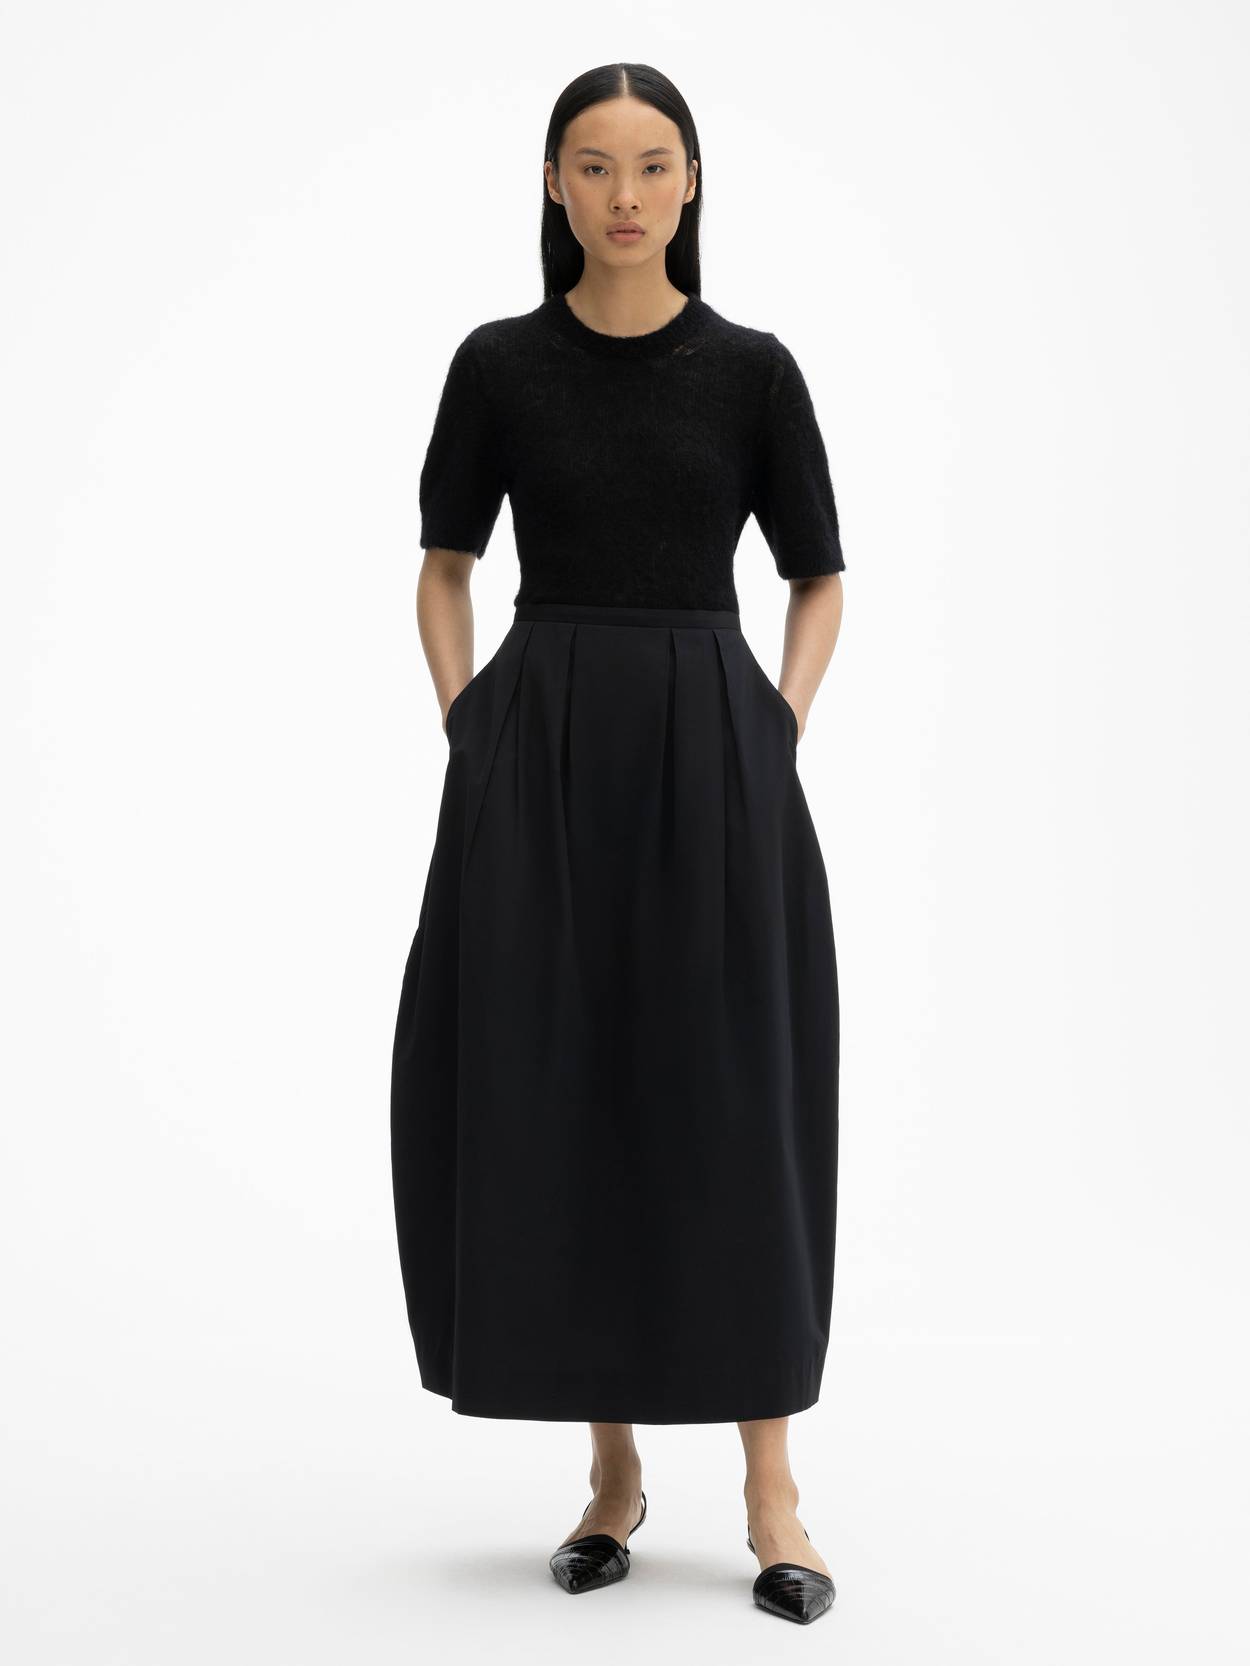 Curved pleated skirt